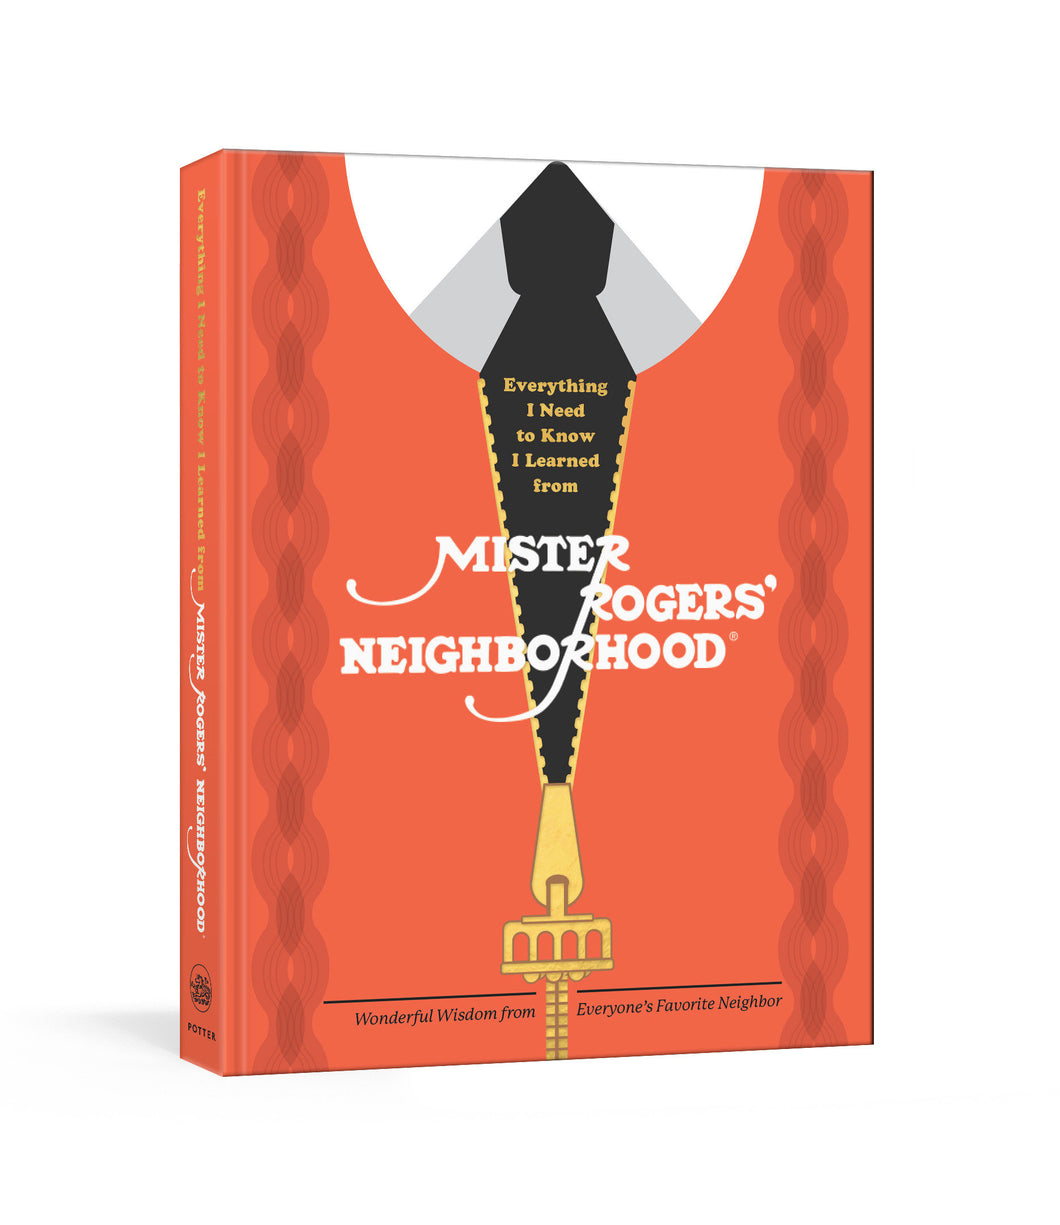 Everything I Need to Know I Learned from Mister Rogers' Neighborhood: Wonderful Wisdom from Everyone's Favorite Neighbor